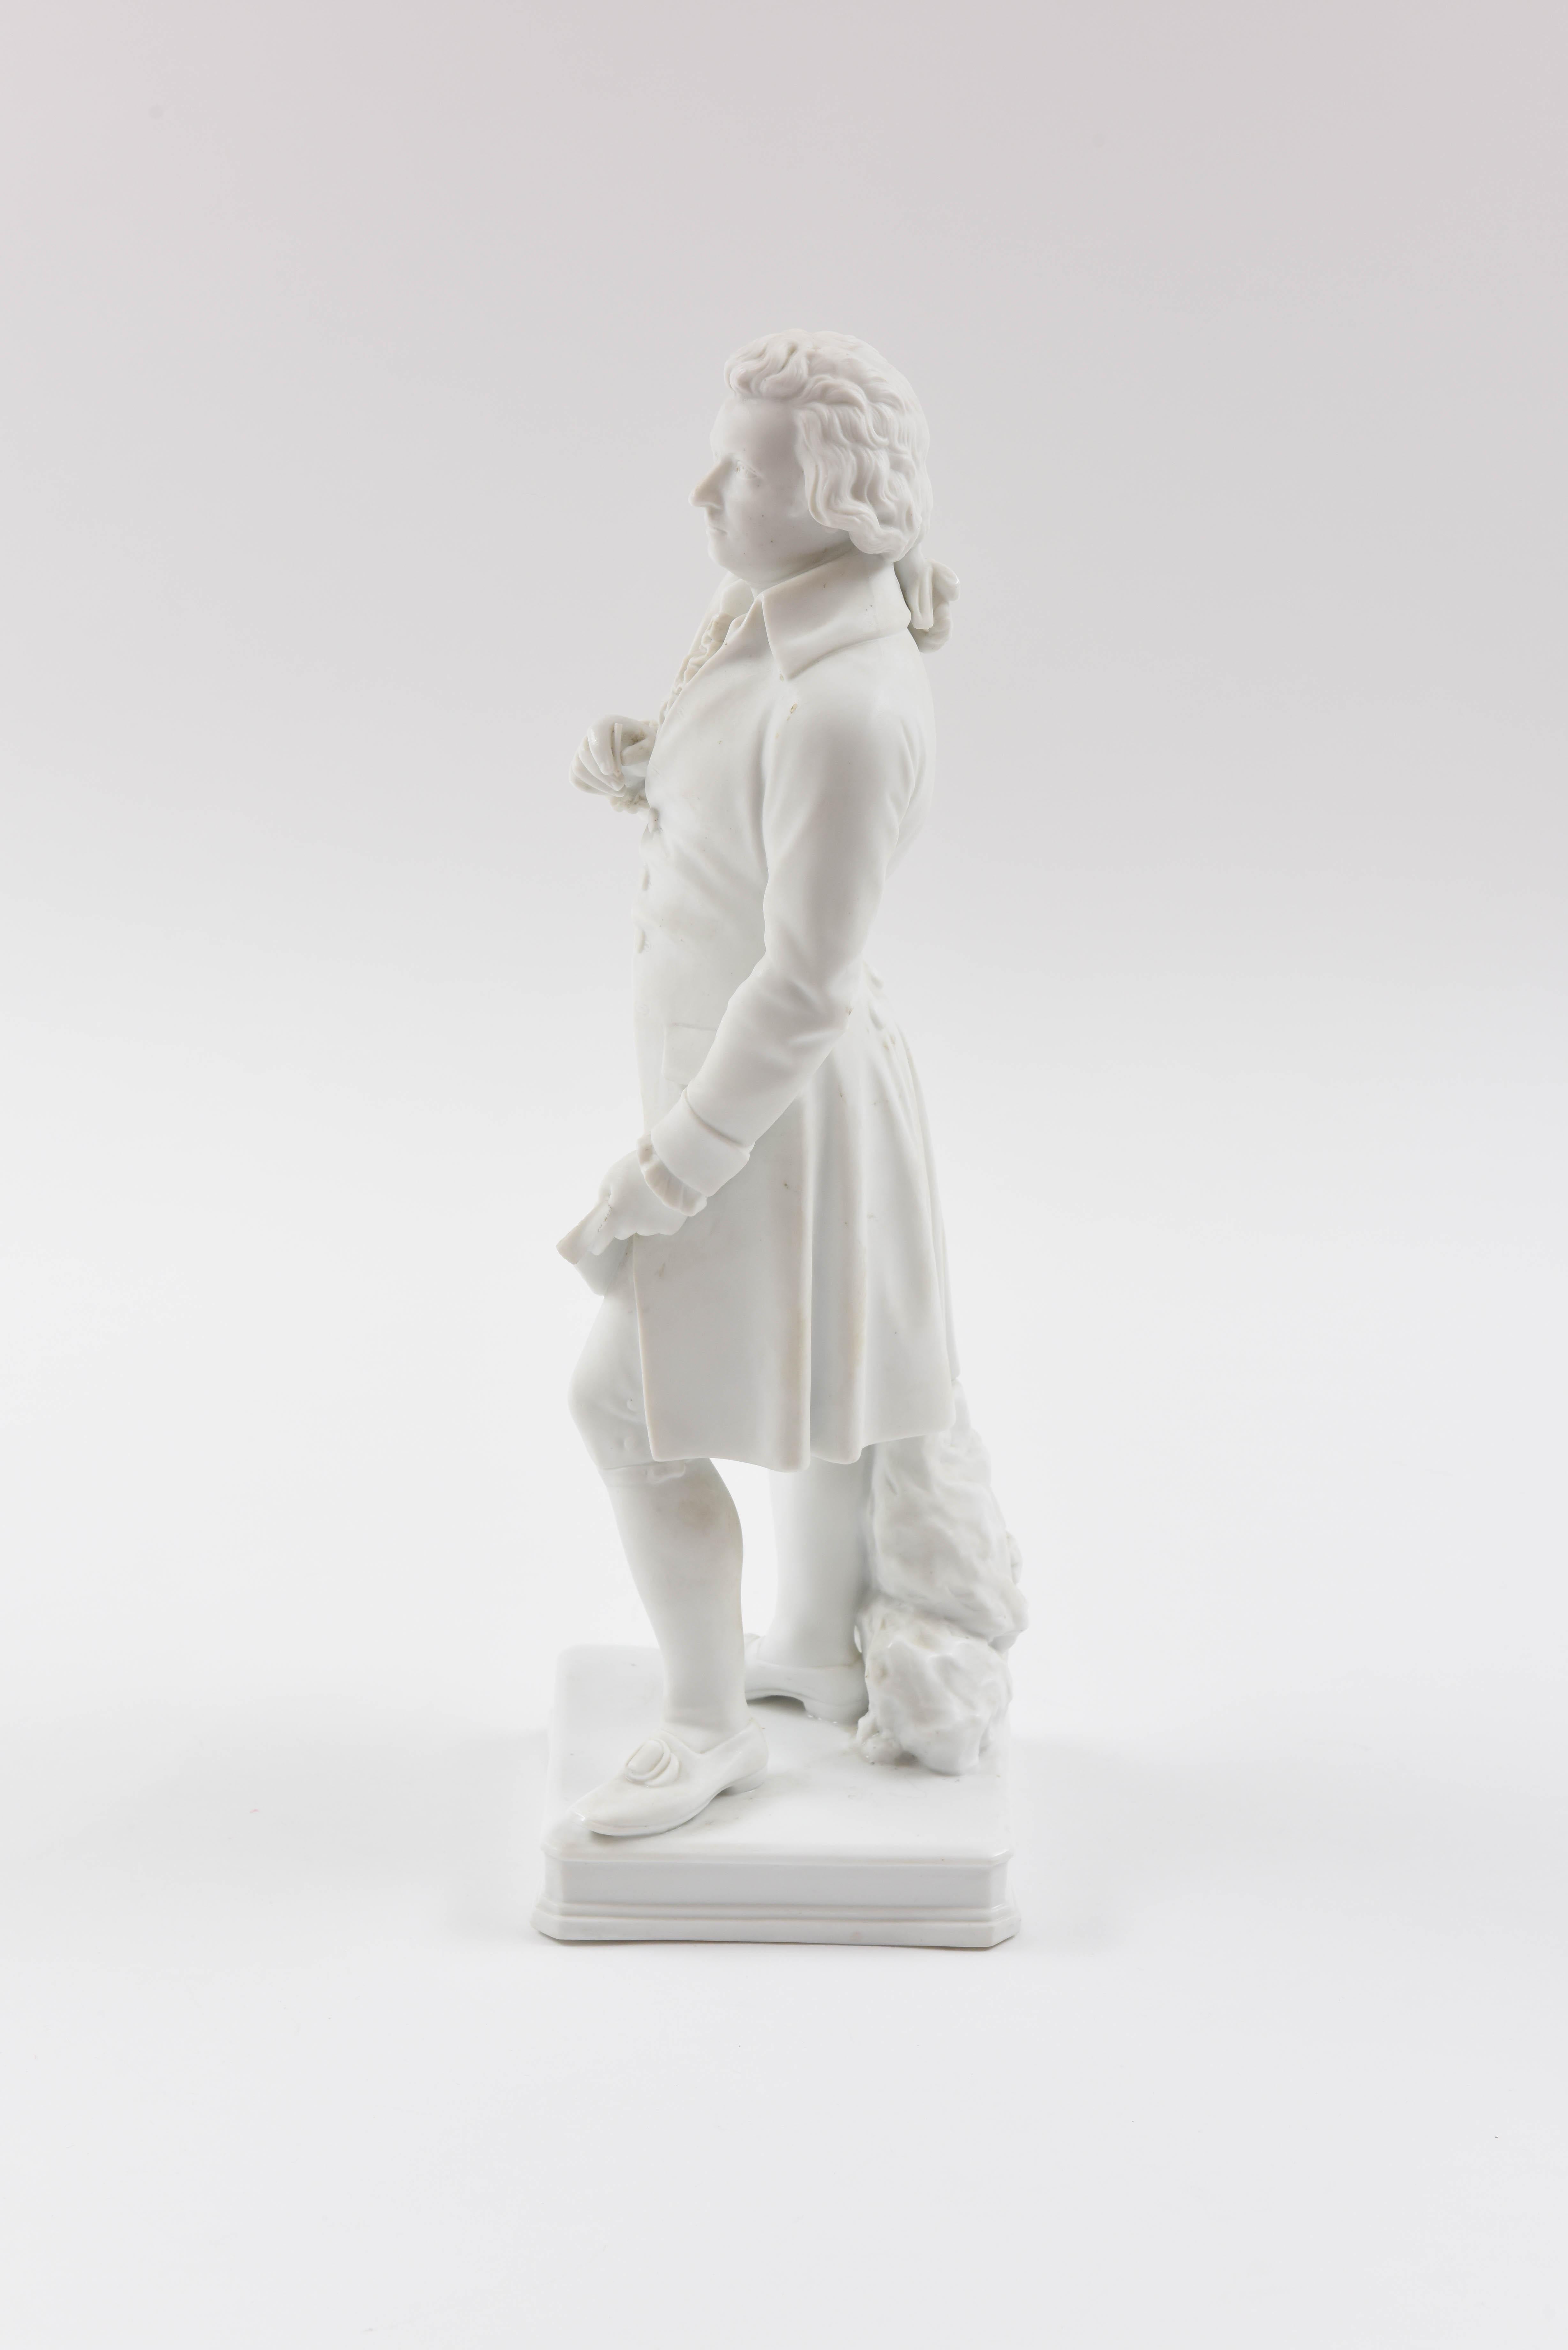 Mozart White Parian Figure, 19th Century, Tall and Regal 1